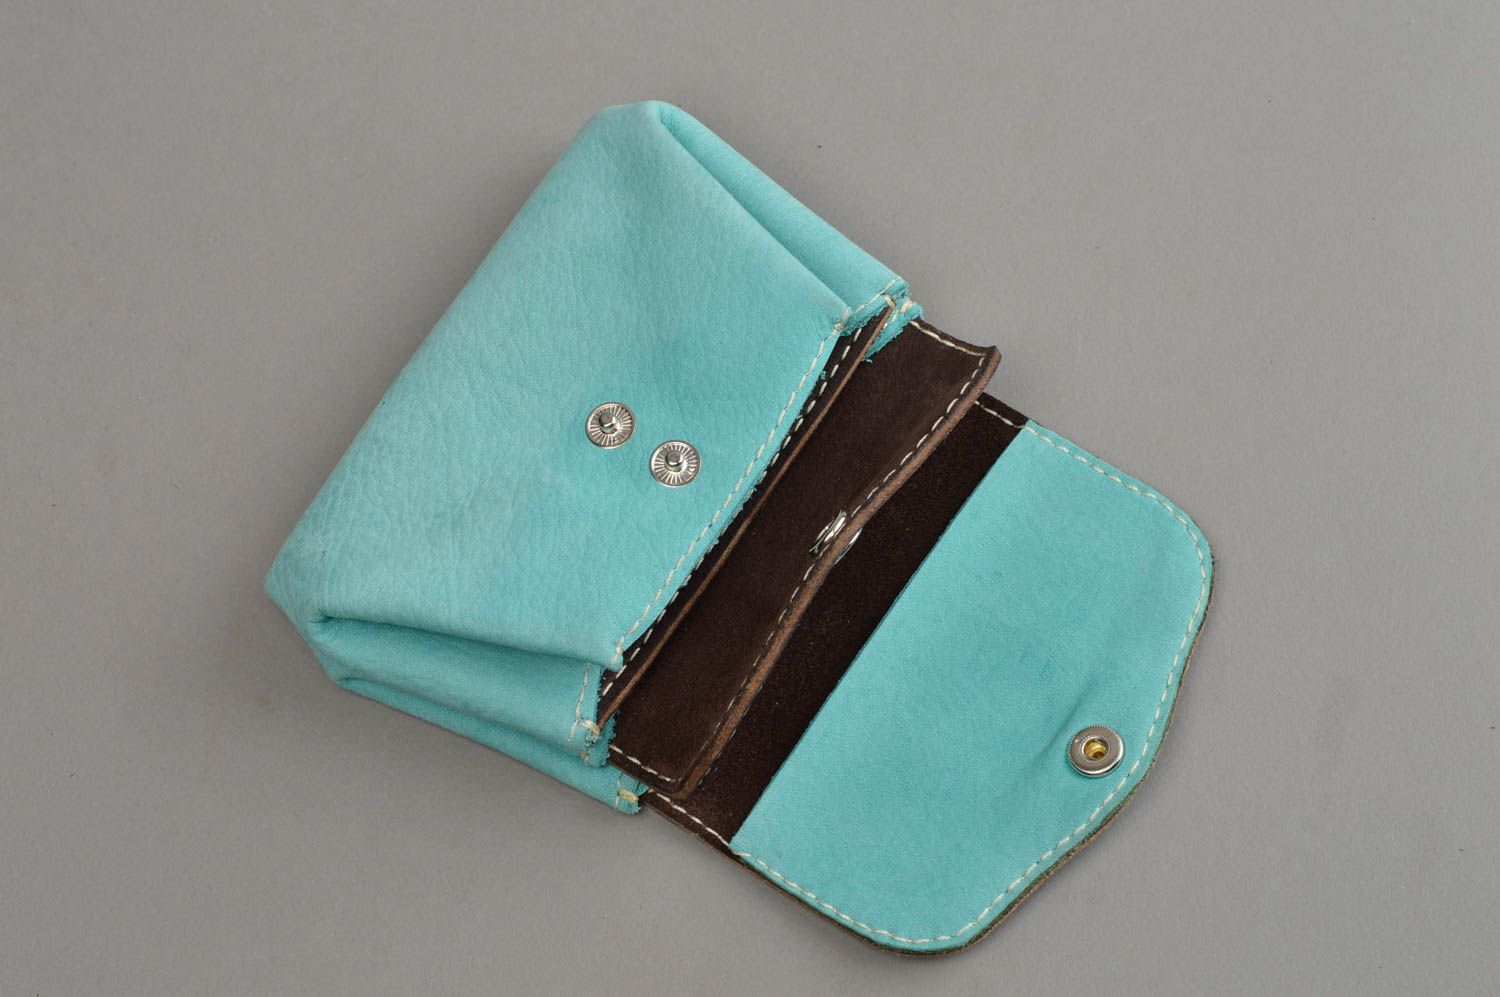 Handmade leather wallet leather purses gift ideas for women designer accessories photo 4